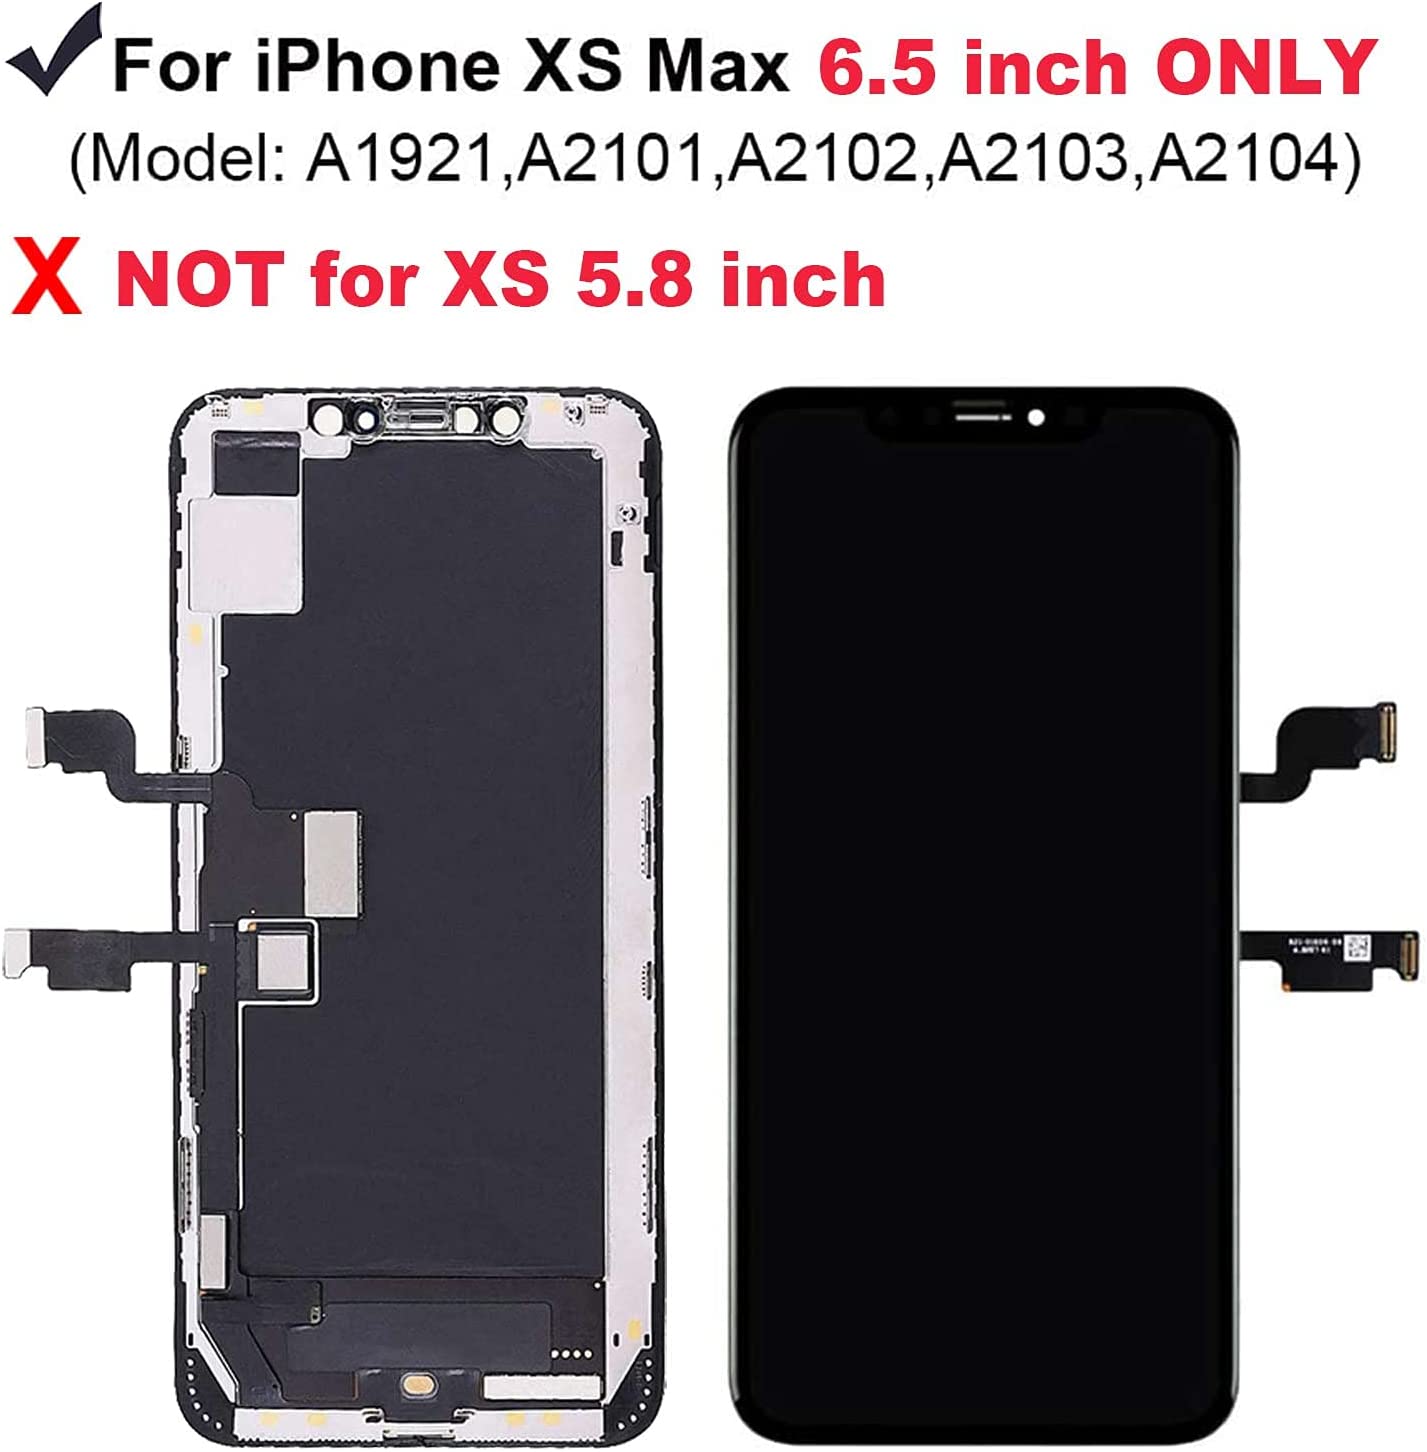 iPhone Xs Max Screen Replacement